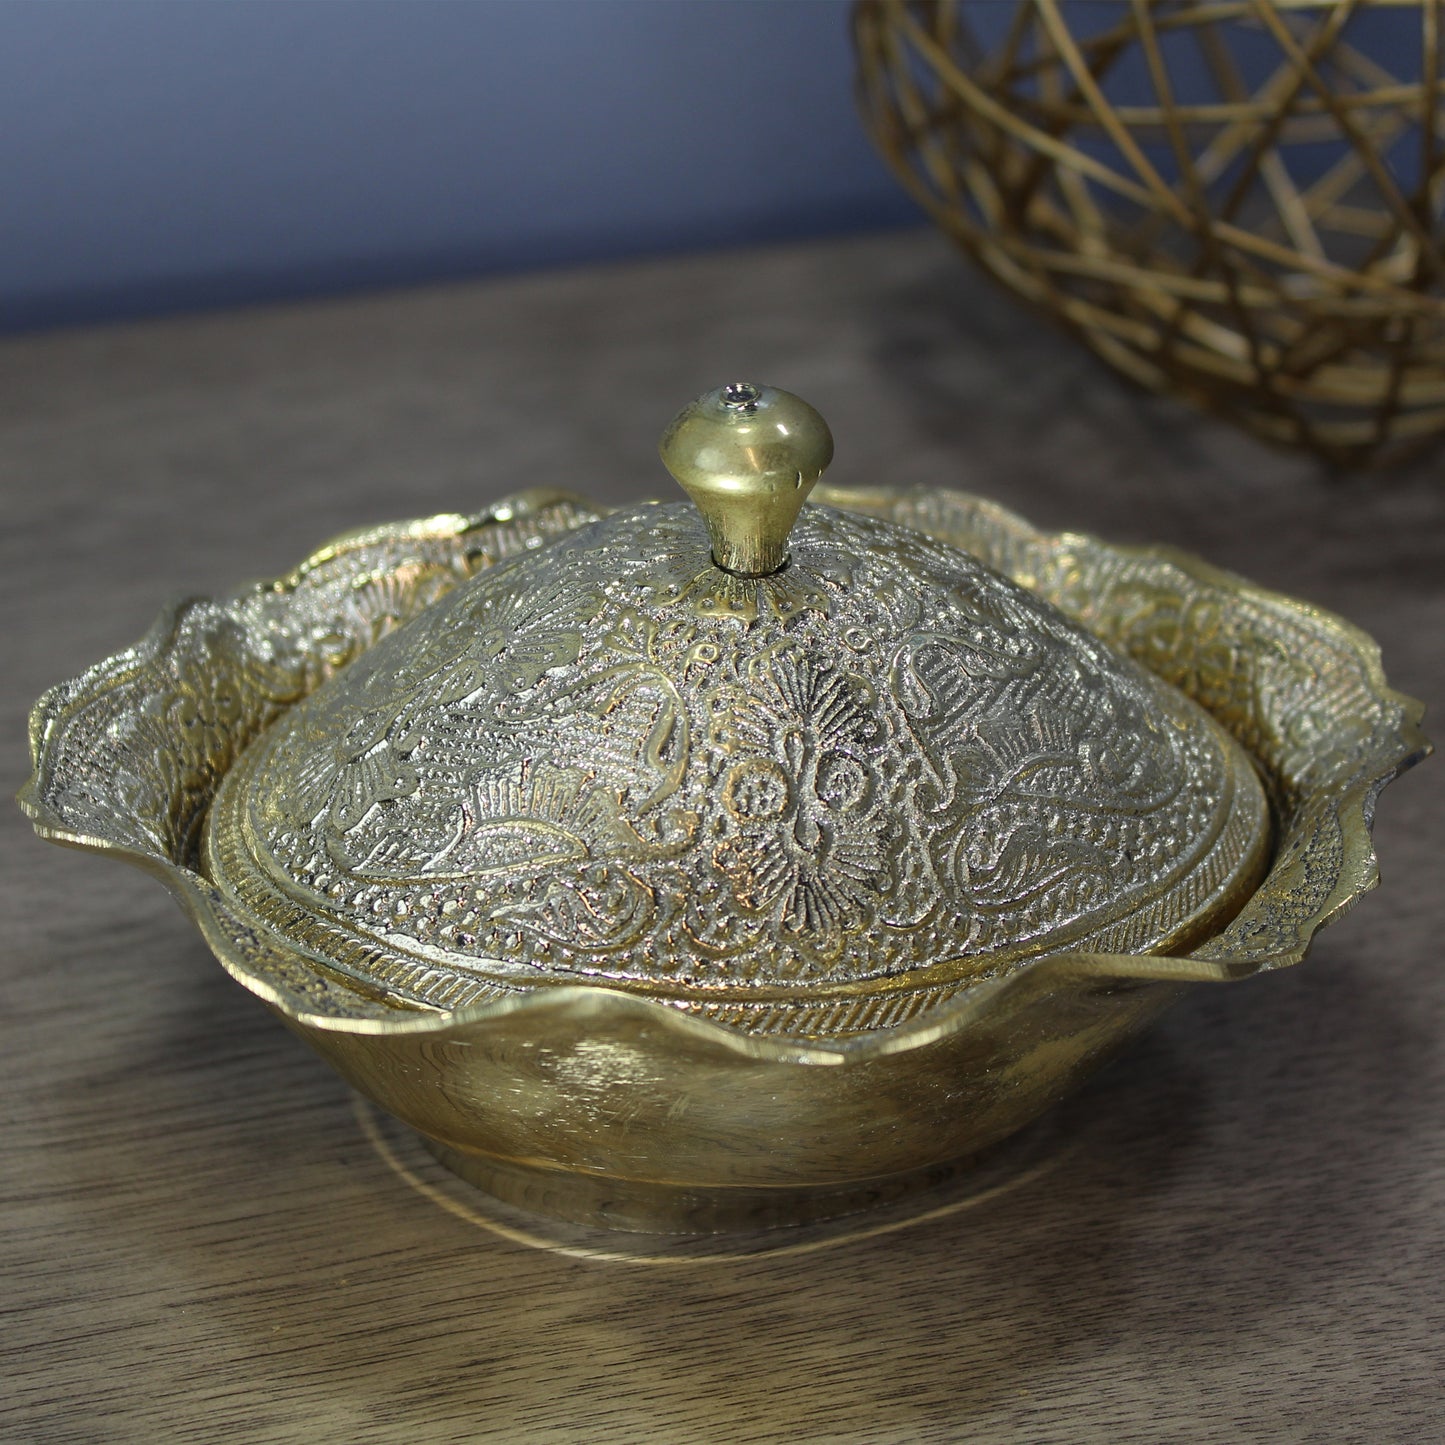 Natural Geo Decorative Golden Brass Pot Oval Bowl with Lid